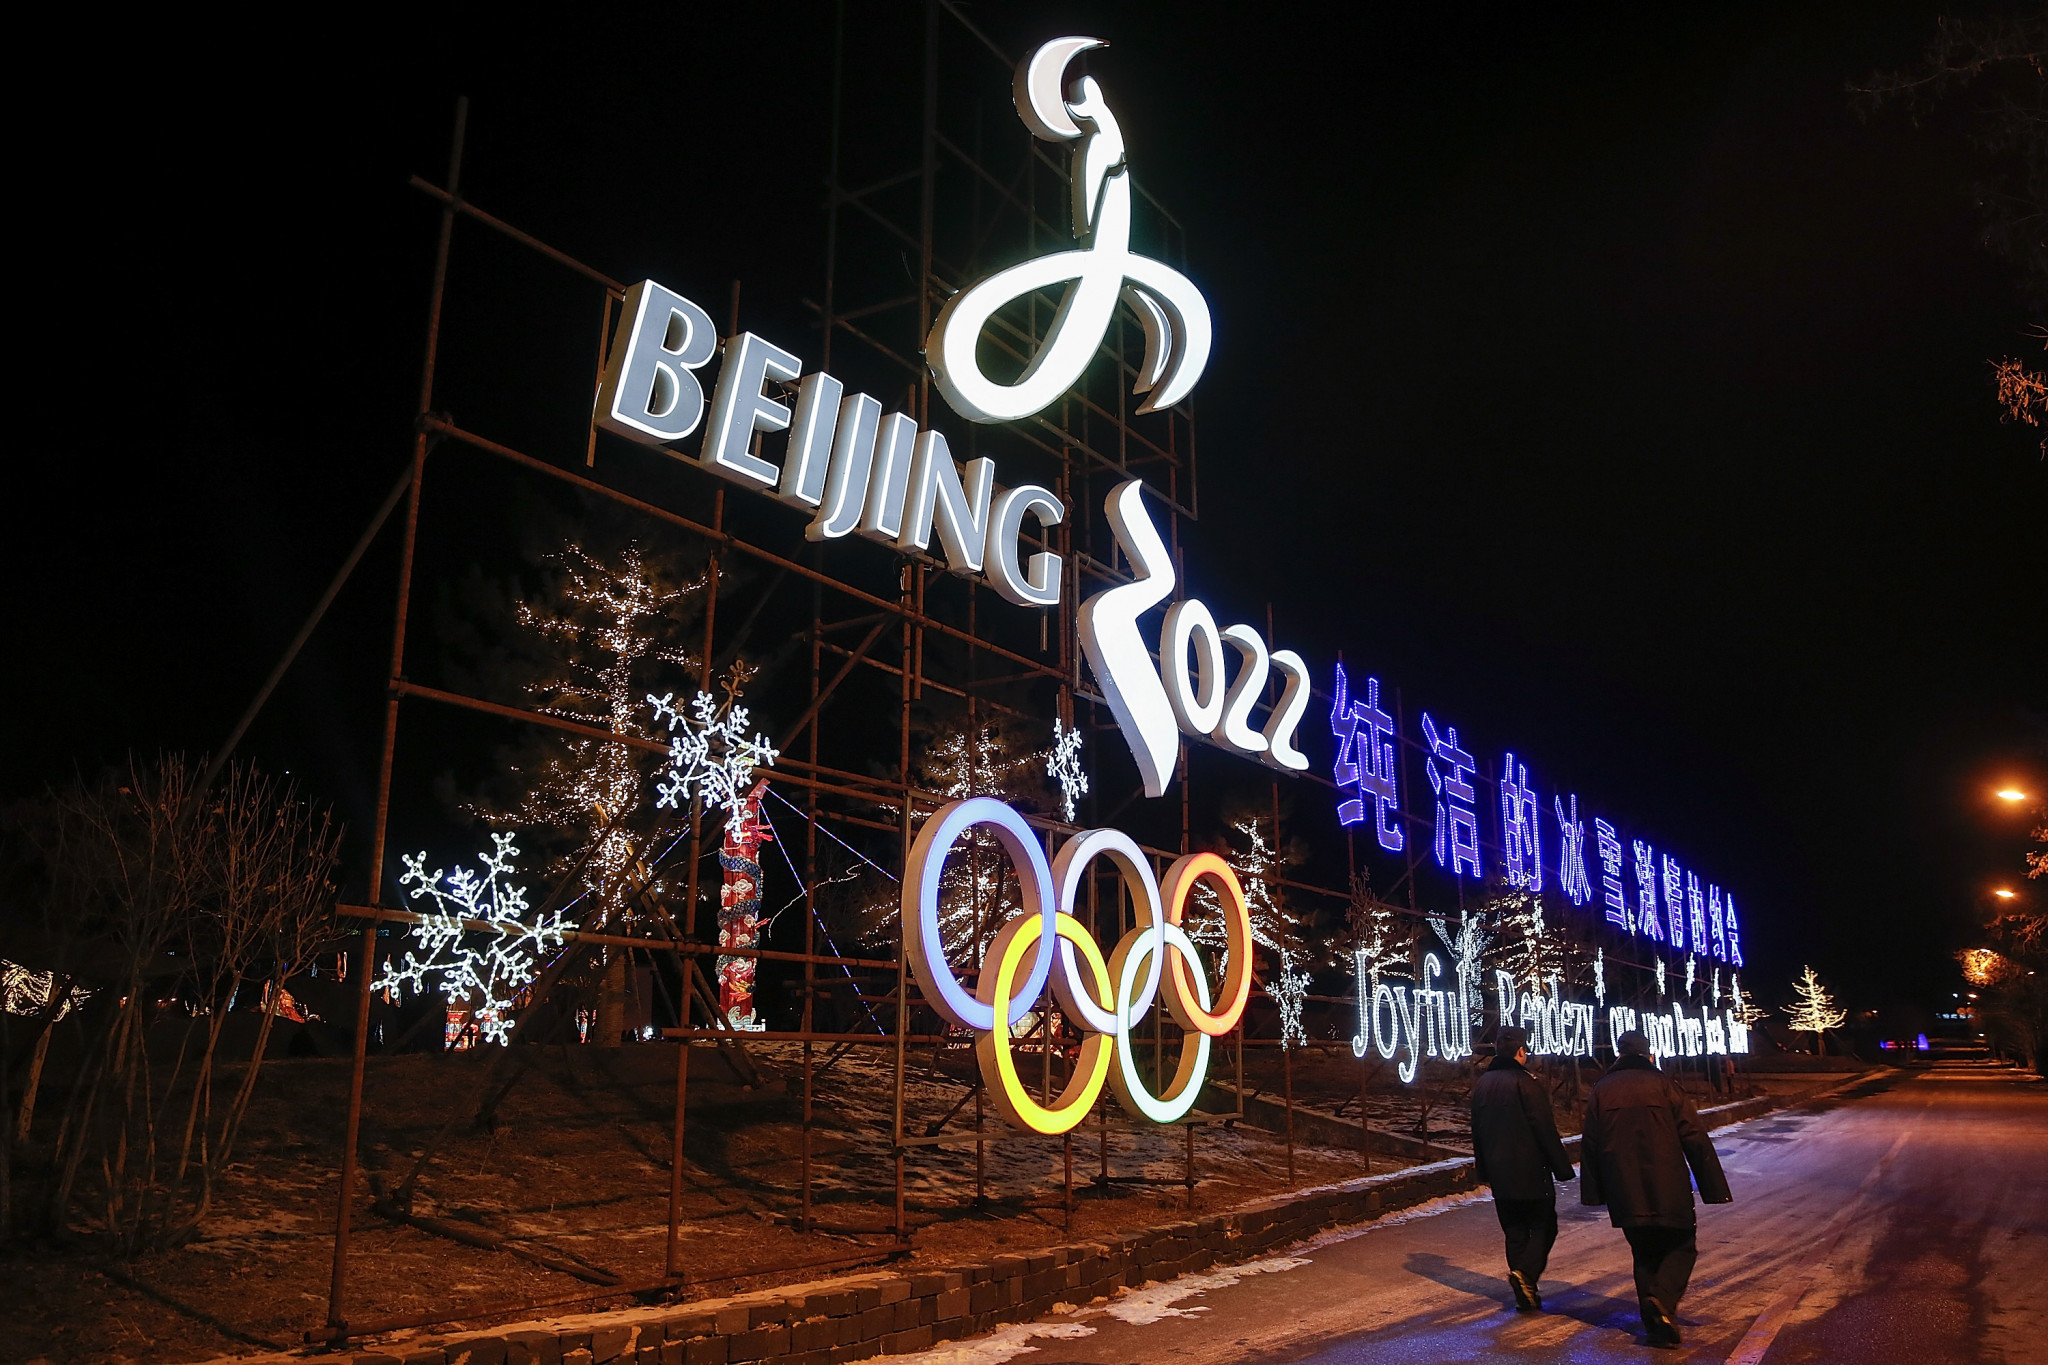 Olympic branding adviser calls for "no cliches" in Beijing 2022 mascots